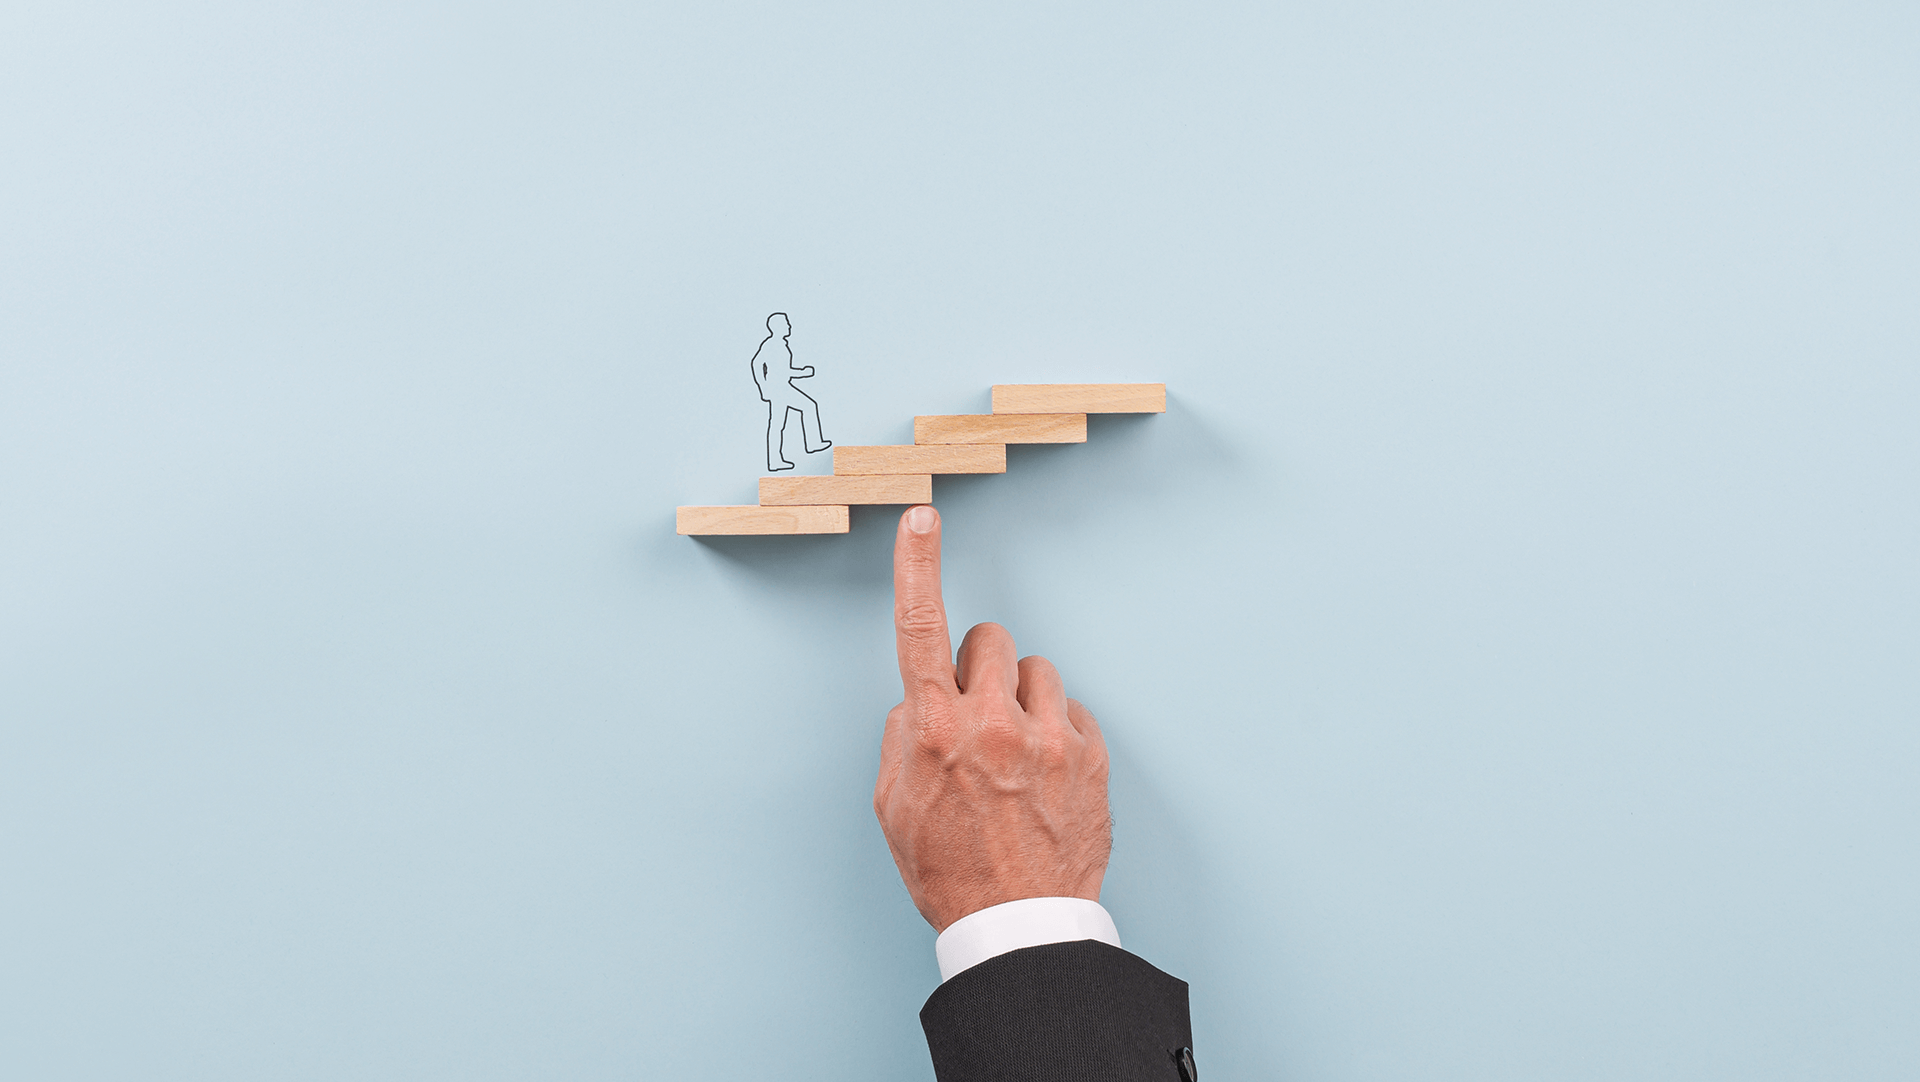 A hand boosts a paper cutout of a person up a staircase of wooden blocks against a blue background, symbolizing support and progression.